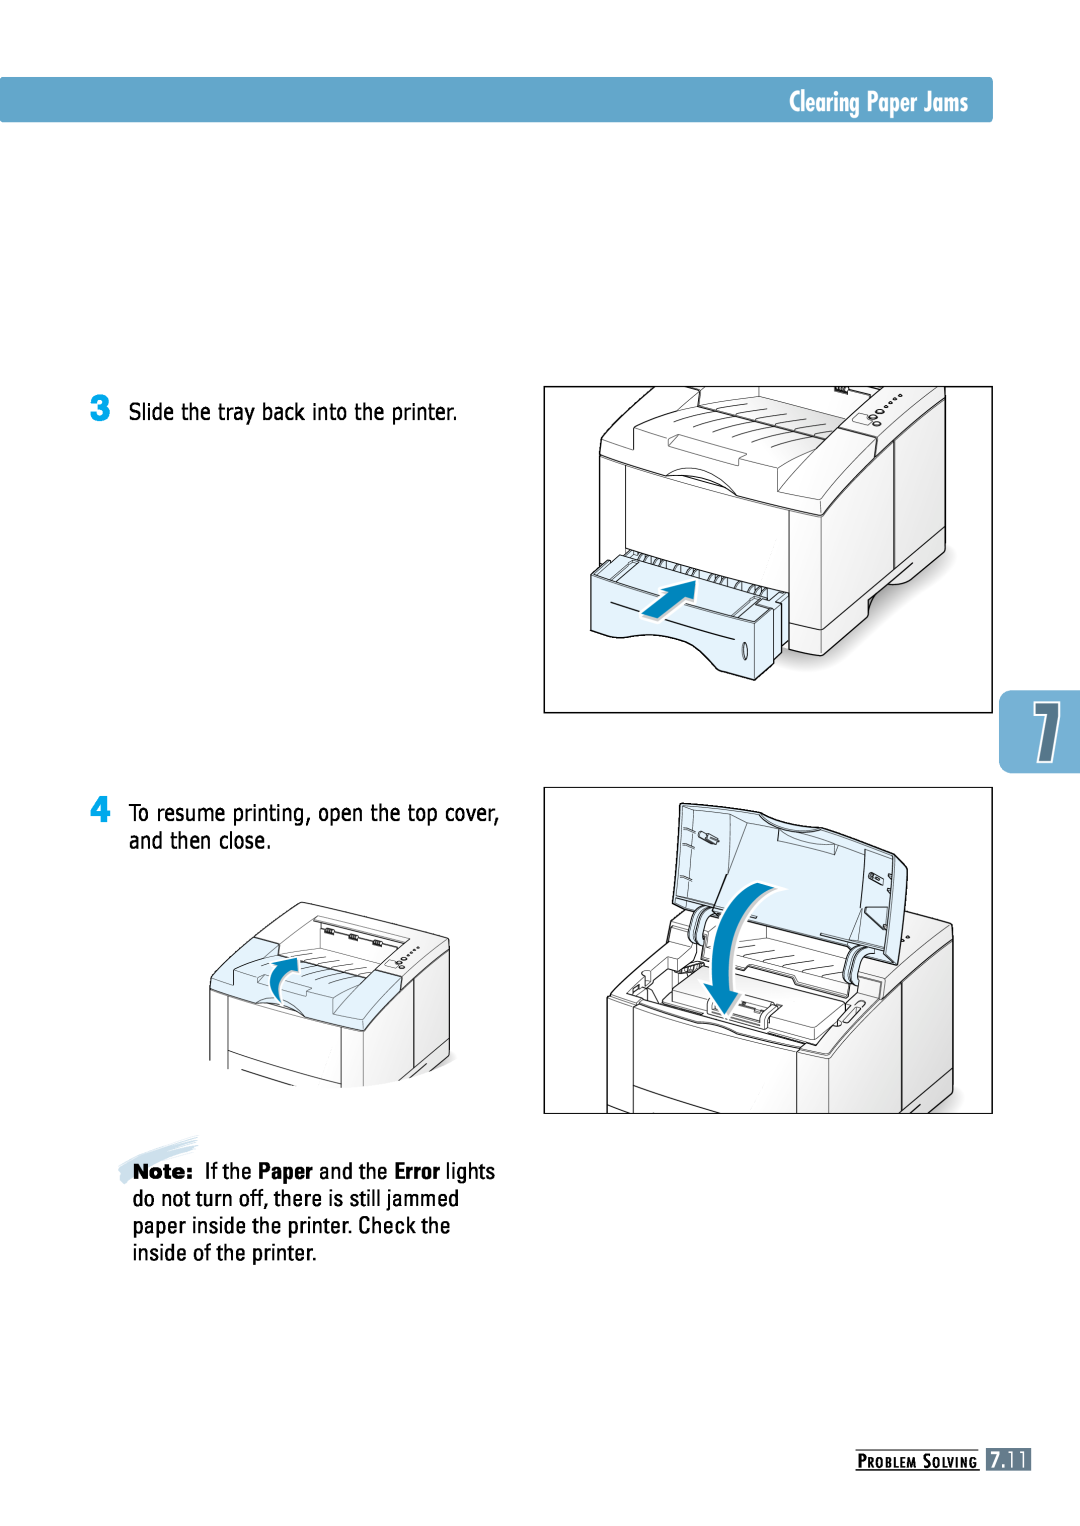 Samsung ML-6060N, ML-6060S manual Clearing Paper Jams, Slide the tray back into the printer, Problem Solving 